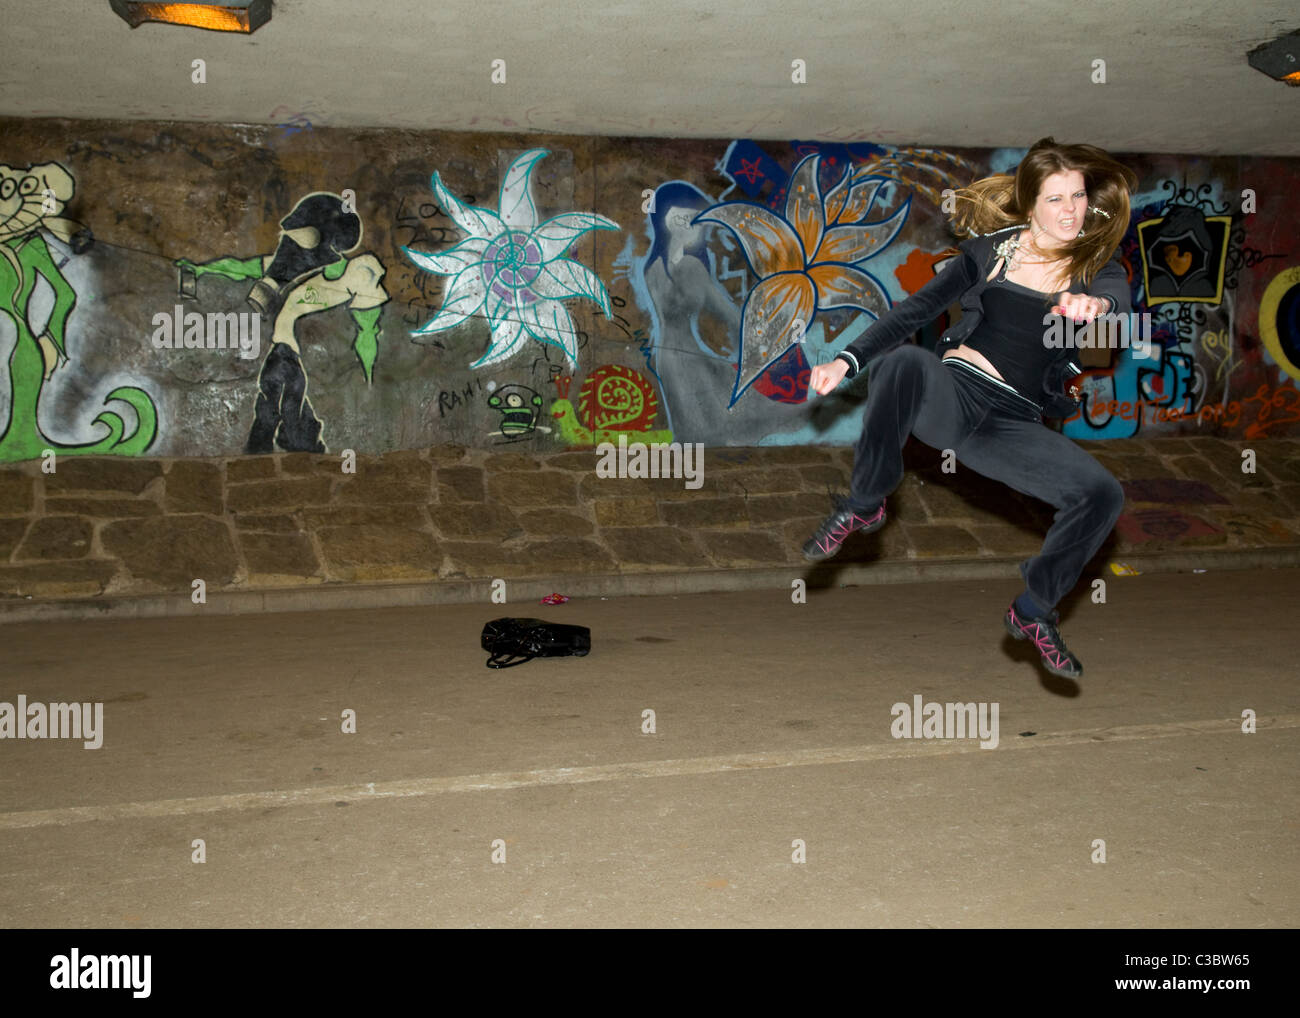 young Caucasian woman doing tae kwon do martial arts kicks in underpass near Emersons Green in Bristol uk Stock Photo